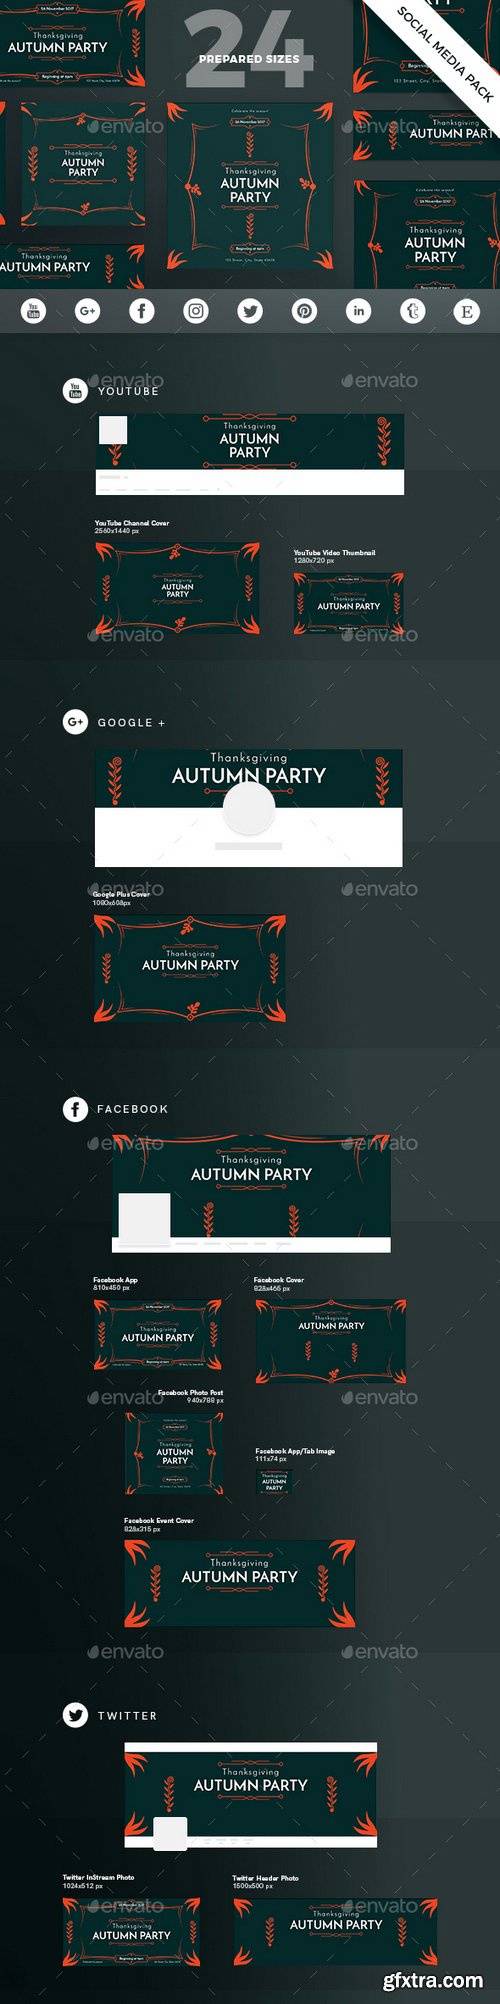 Graphicriver - Autumn Party Social Media Pack 20769397